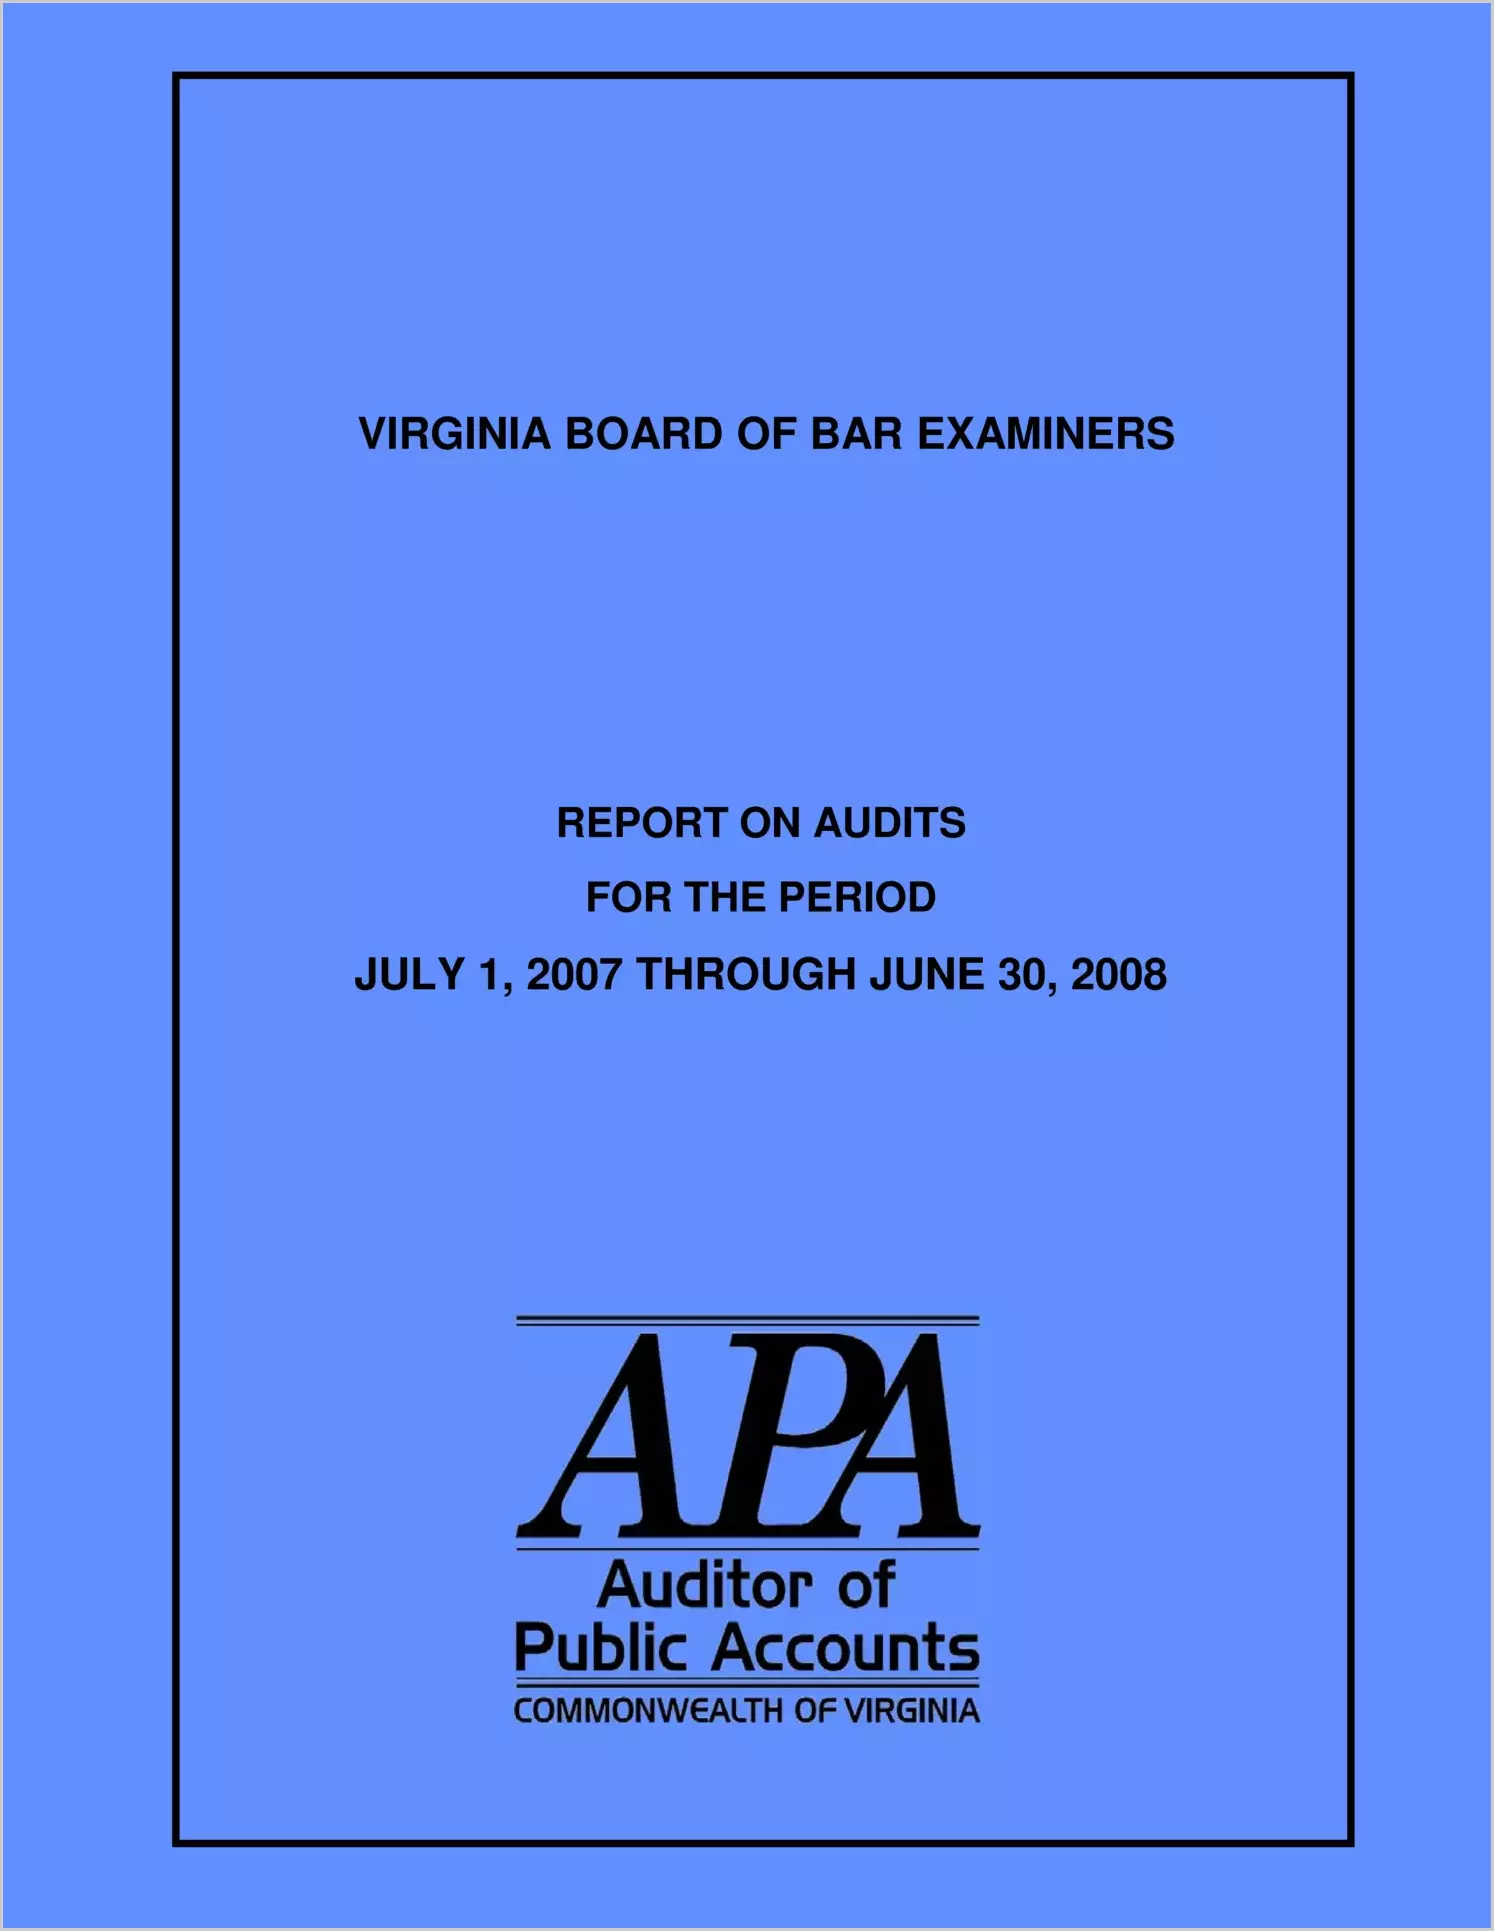 Virginia Board of Bar Examiners Report on Audit for the Period July 1, 2007, through June 30, 2008